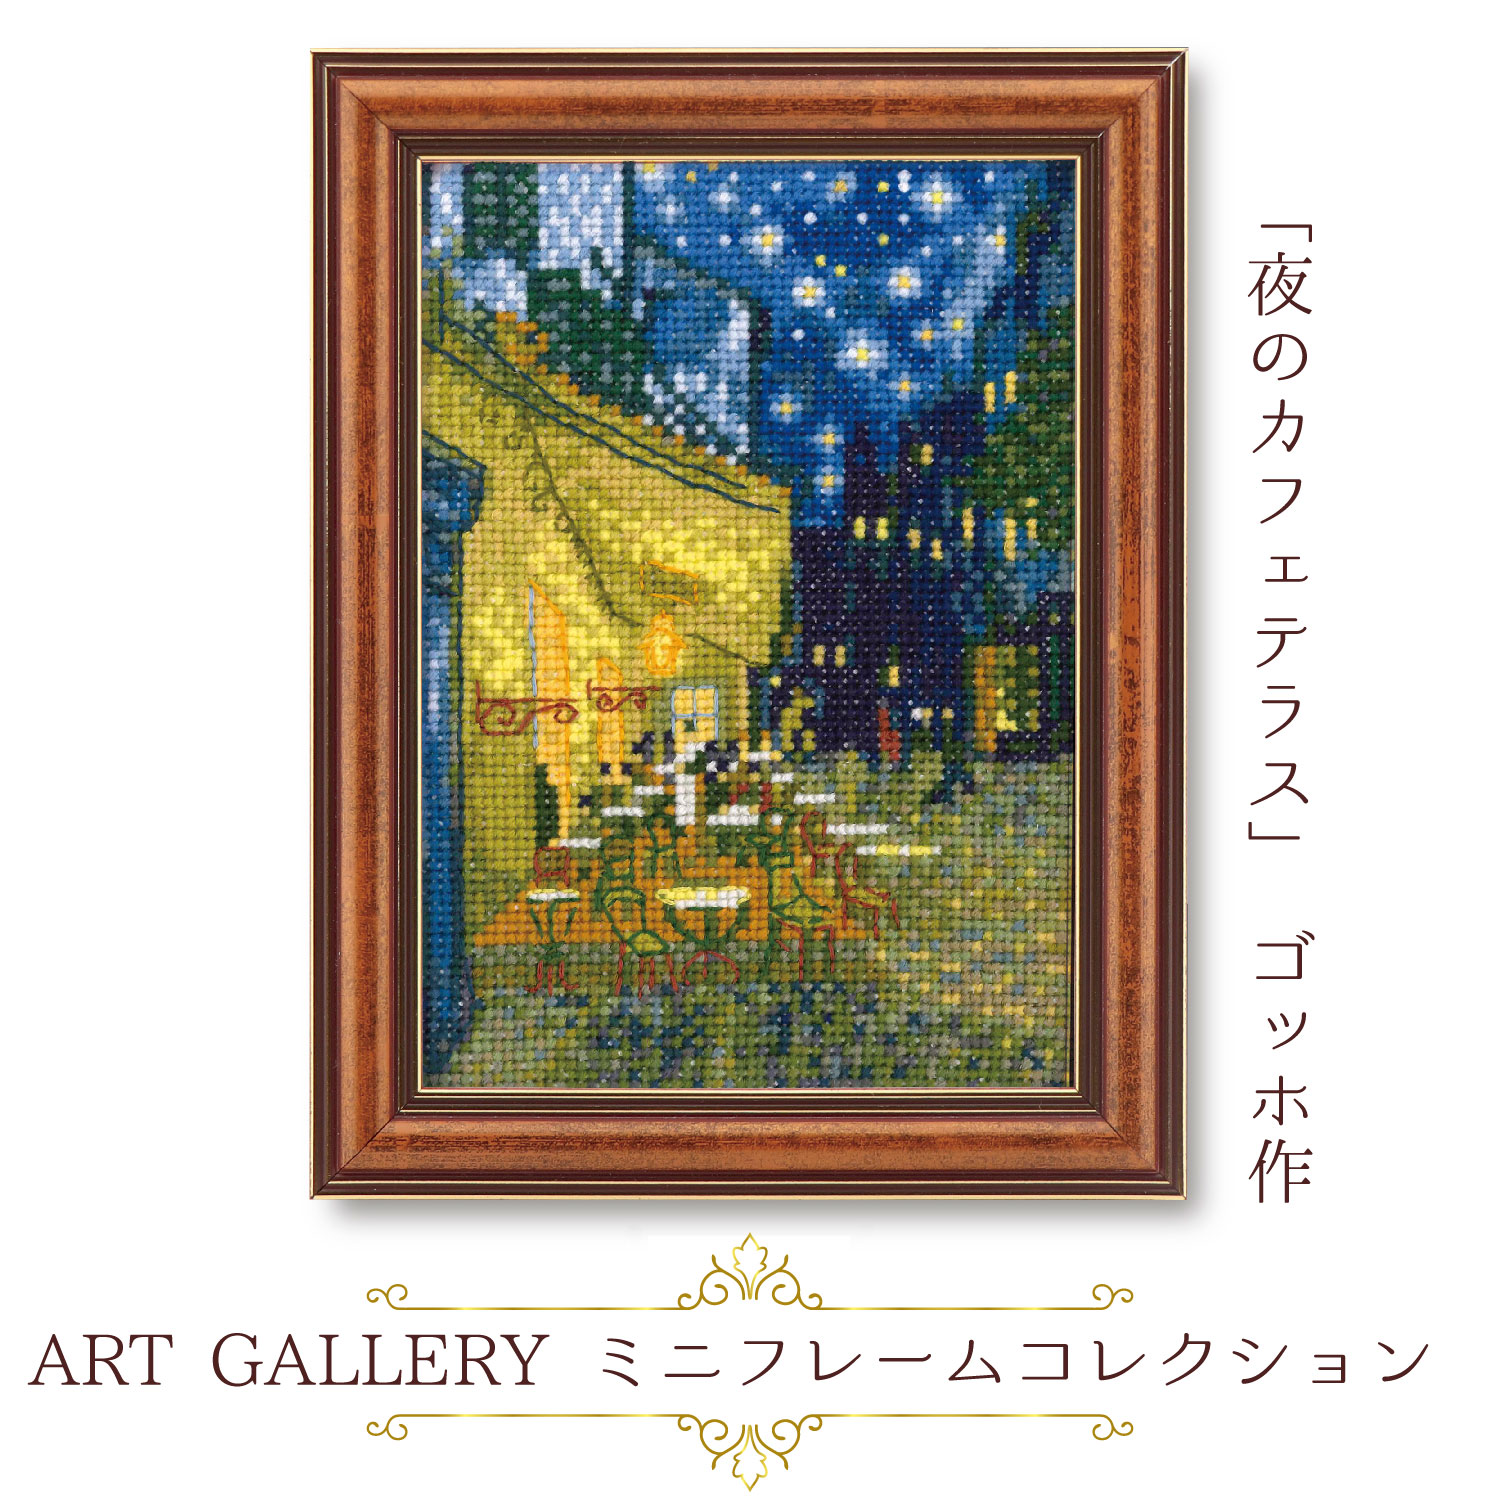 OLY-K7589 Olympus Embroidery Kit ART GALLERY Mini Frame Collection "Night Cafe Terrace" by Van Gogh (pcs)